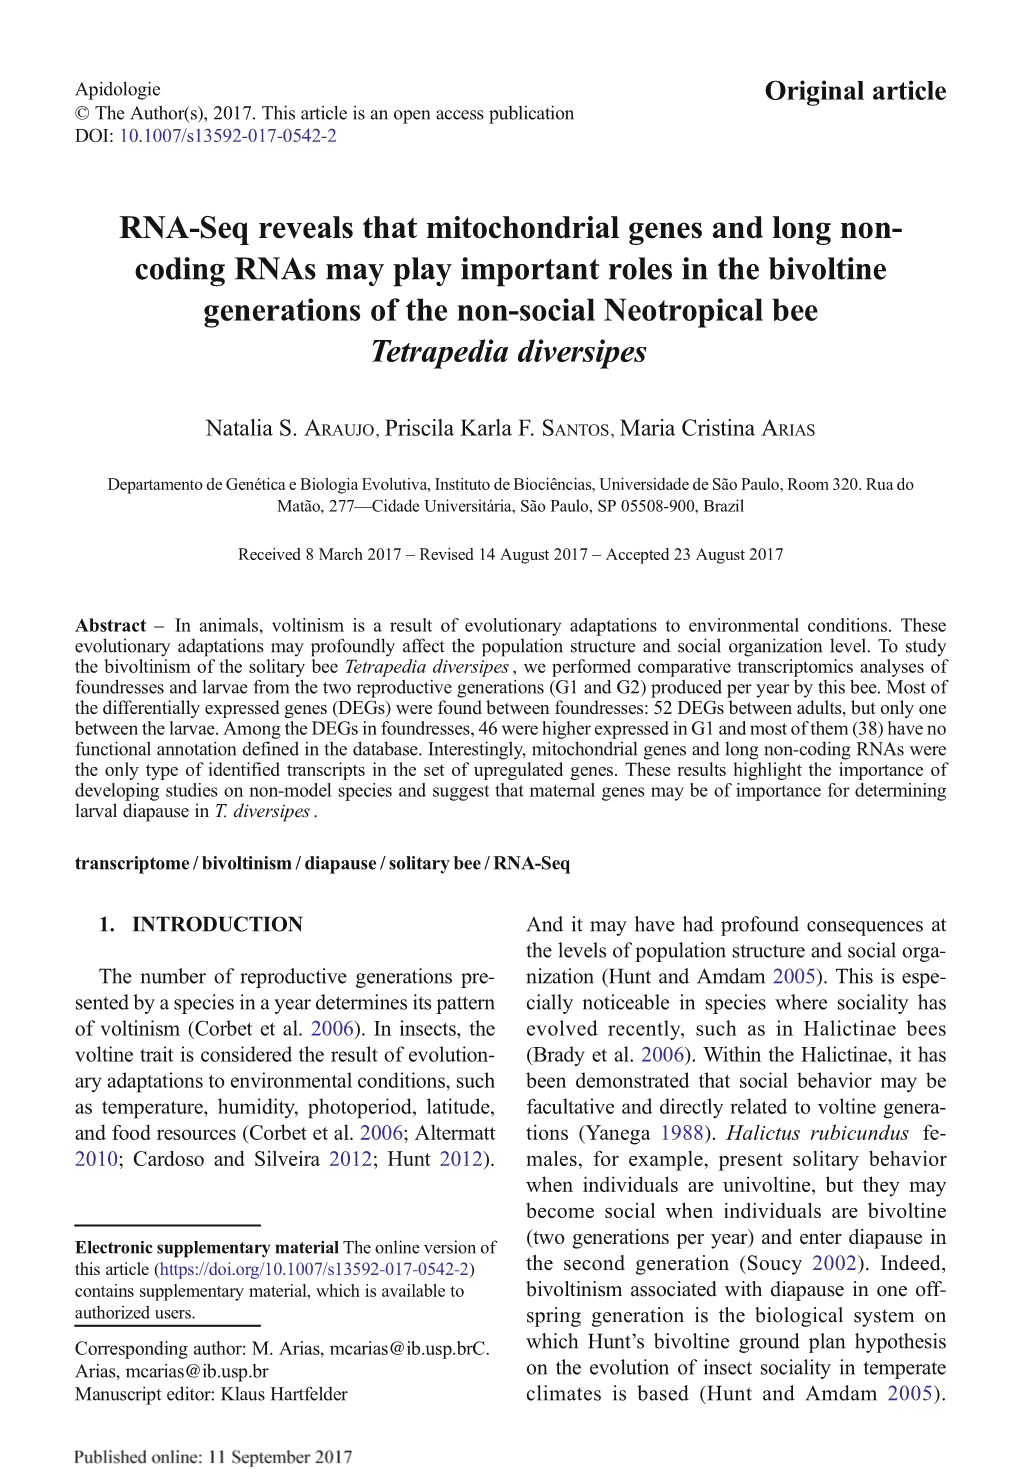 RNA-Seq Reveals That Mitochondrial Genes and Long Non-Coding Rnas May Play Important Roles in the Bivoltine Generations of the N